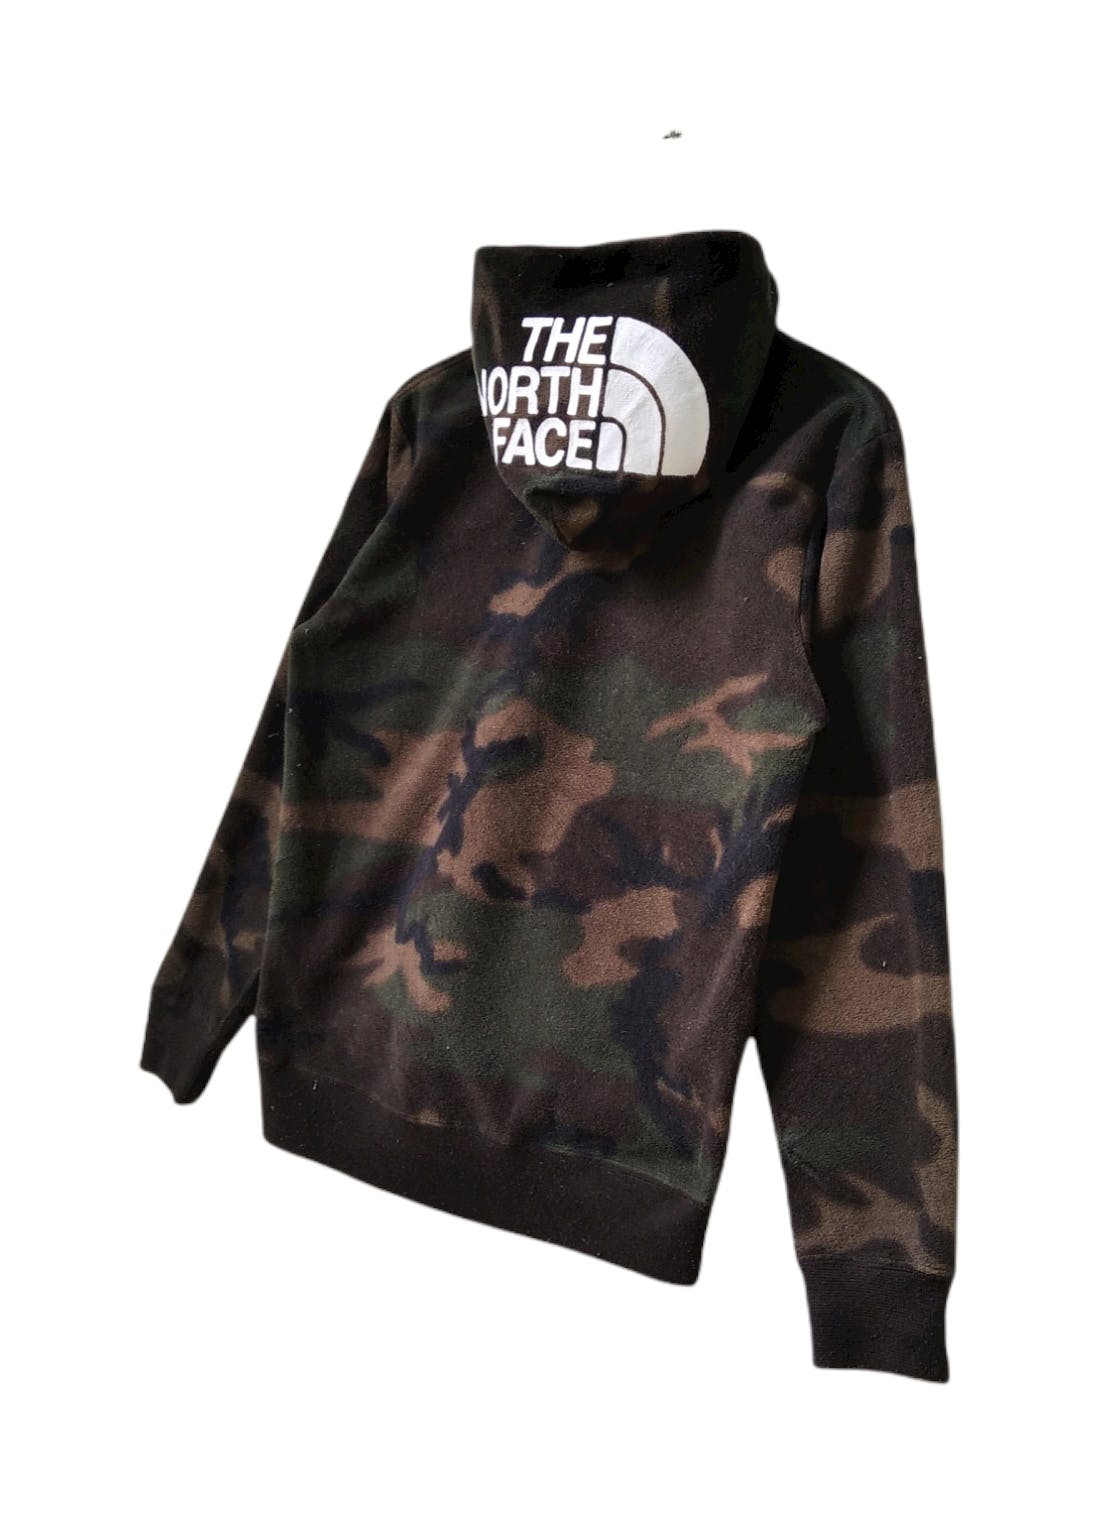 Stunning🔥The North Face Camo Embroided Logo Fleece Hoodie - 7